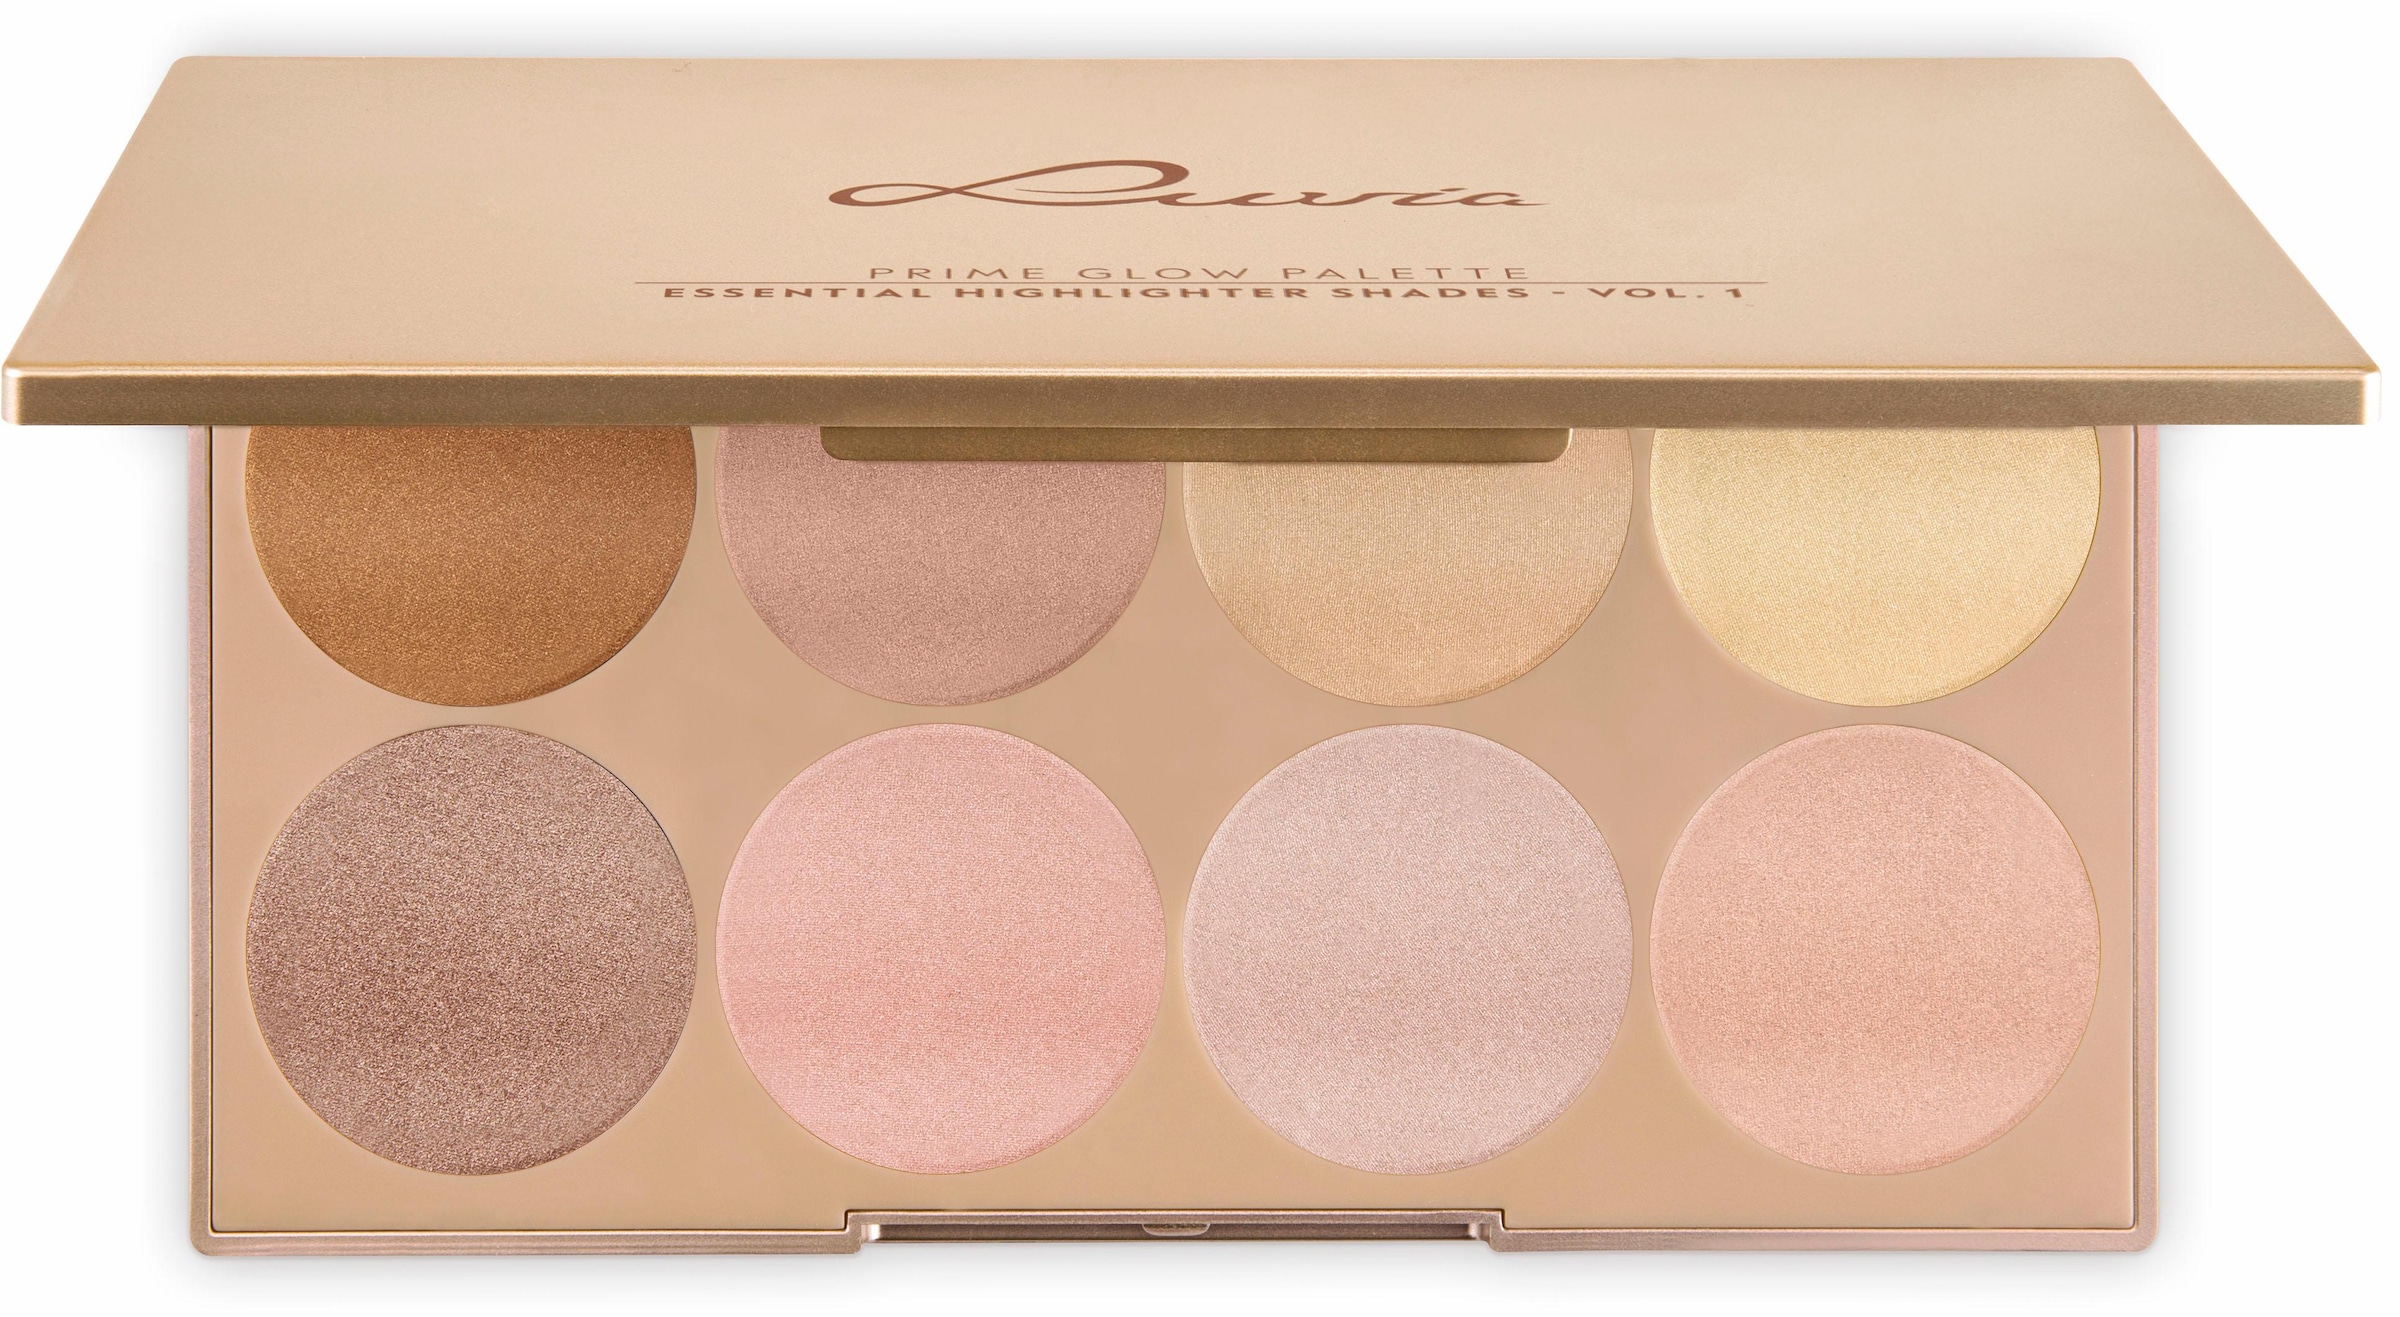 Luvia Cosmetics Highlighter-Palette »Prime Glow Vol. Essential 1« Contouring tlg.) Farben Shades 8 (8